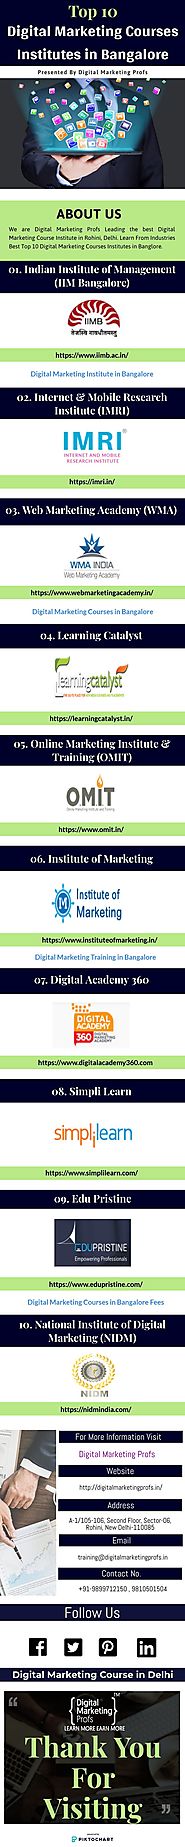 Digital Marketing Courses in Bangalore - Infographic